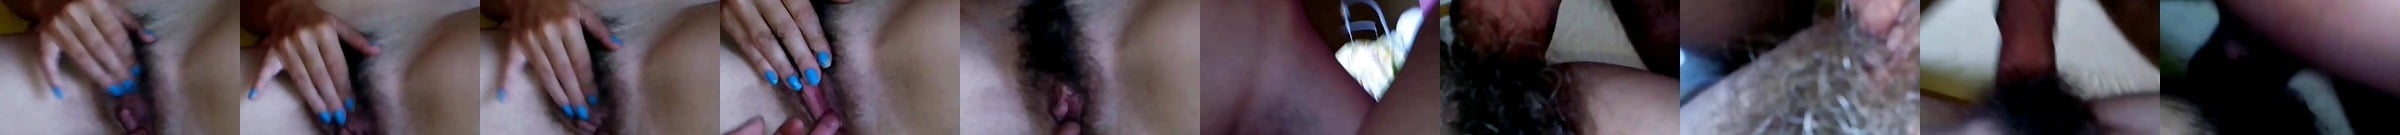 Featured Homemade Couple Sex Porn Videos Xhamster